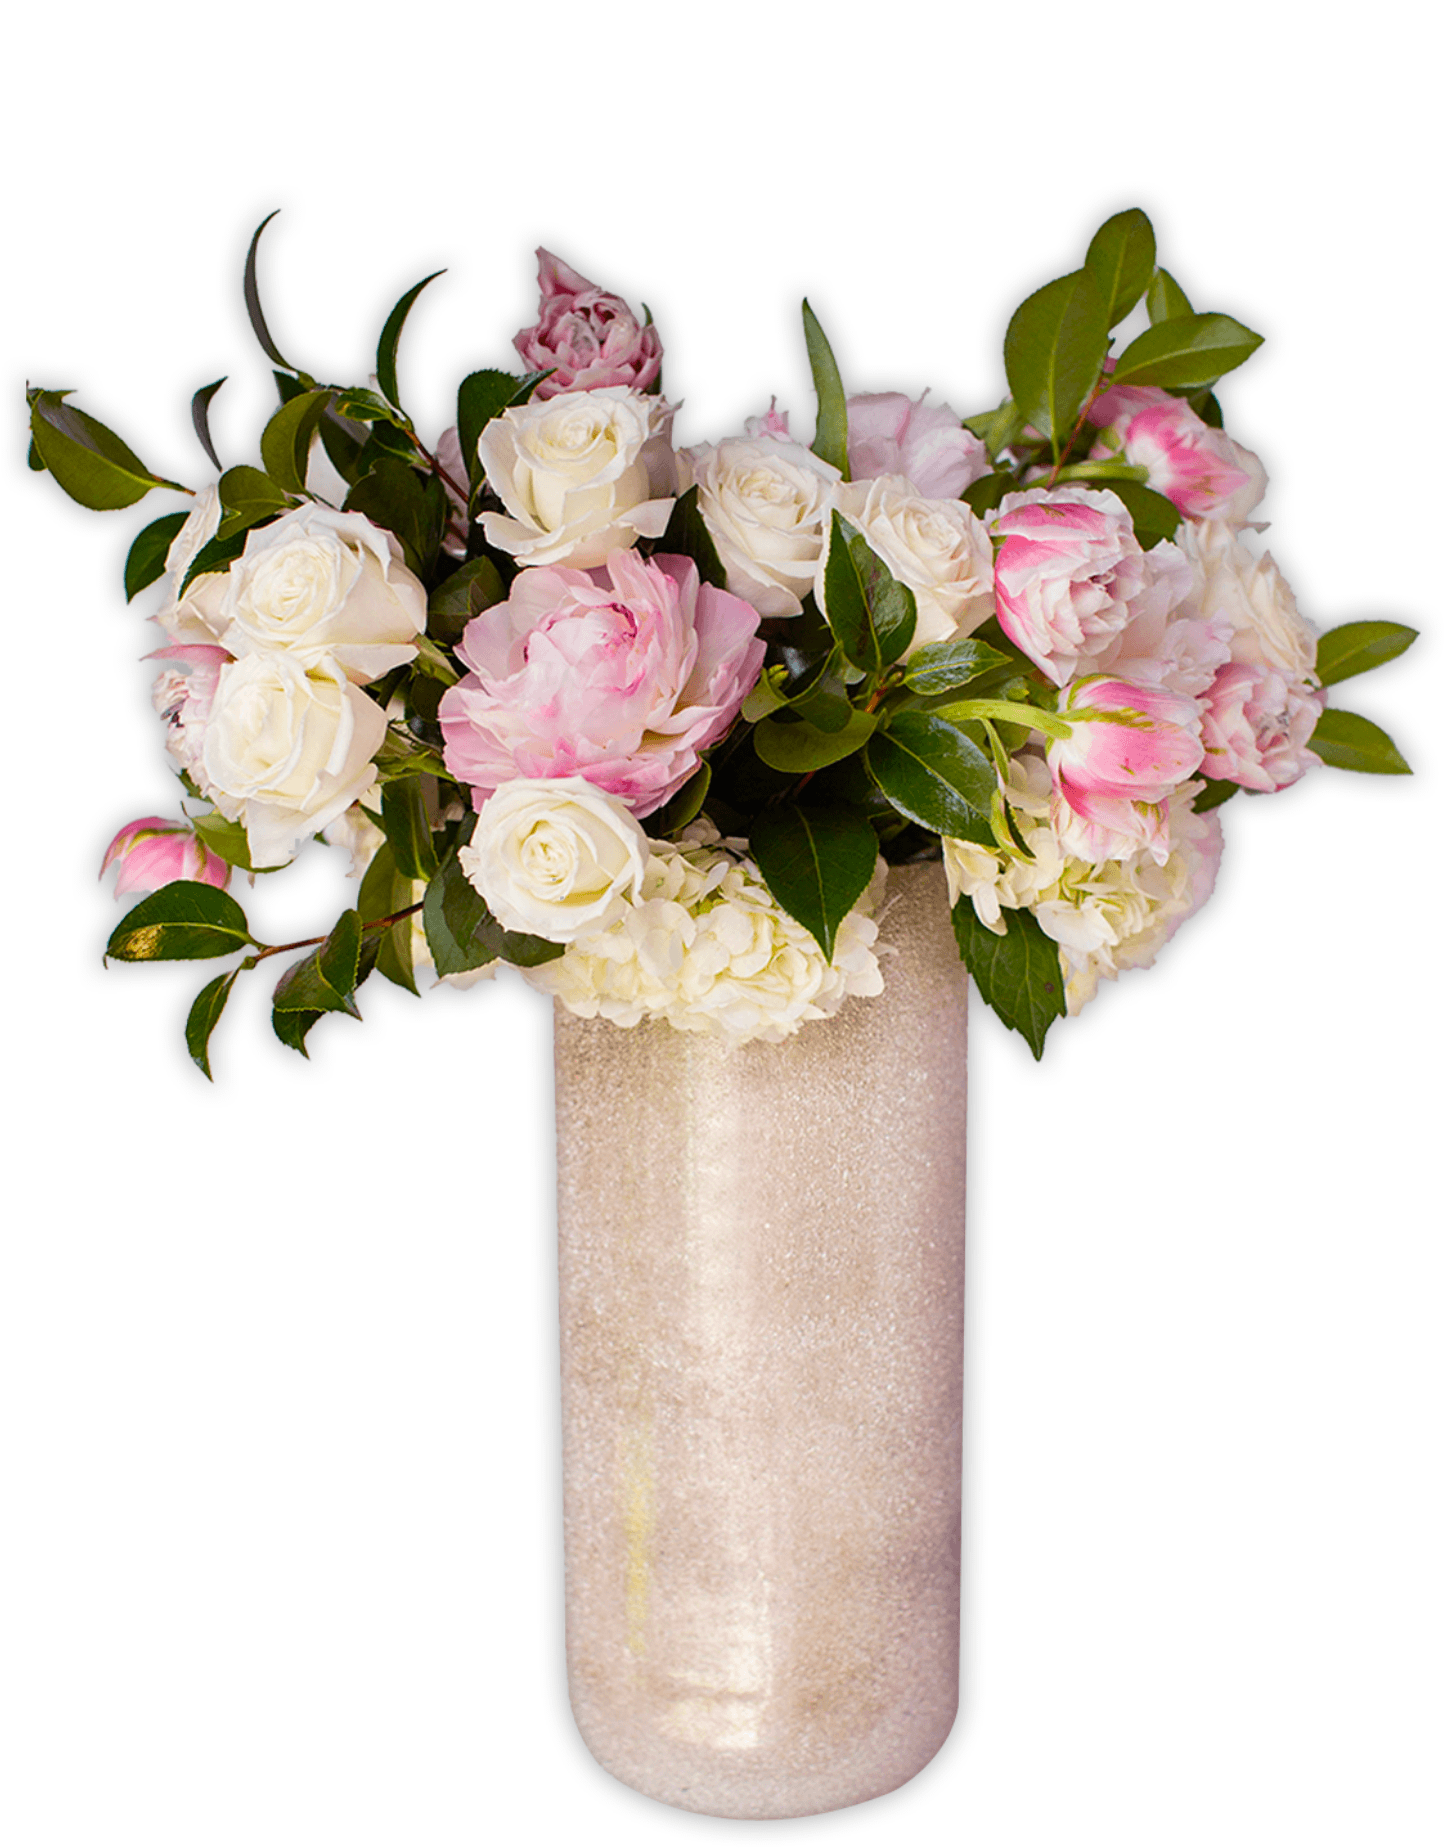 mixed hydrangea & roses arrangement with touch of greenery.